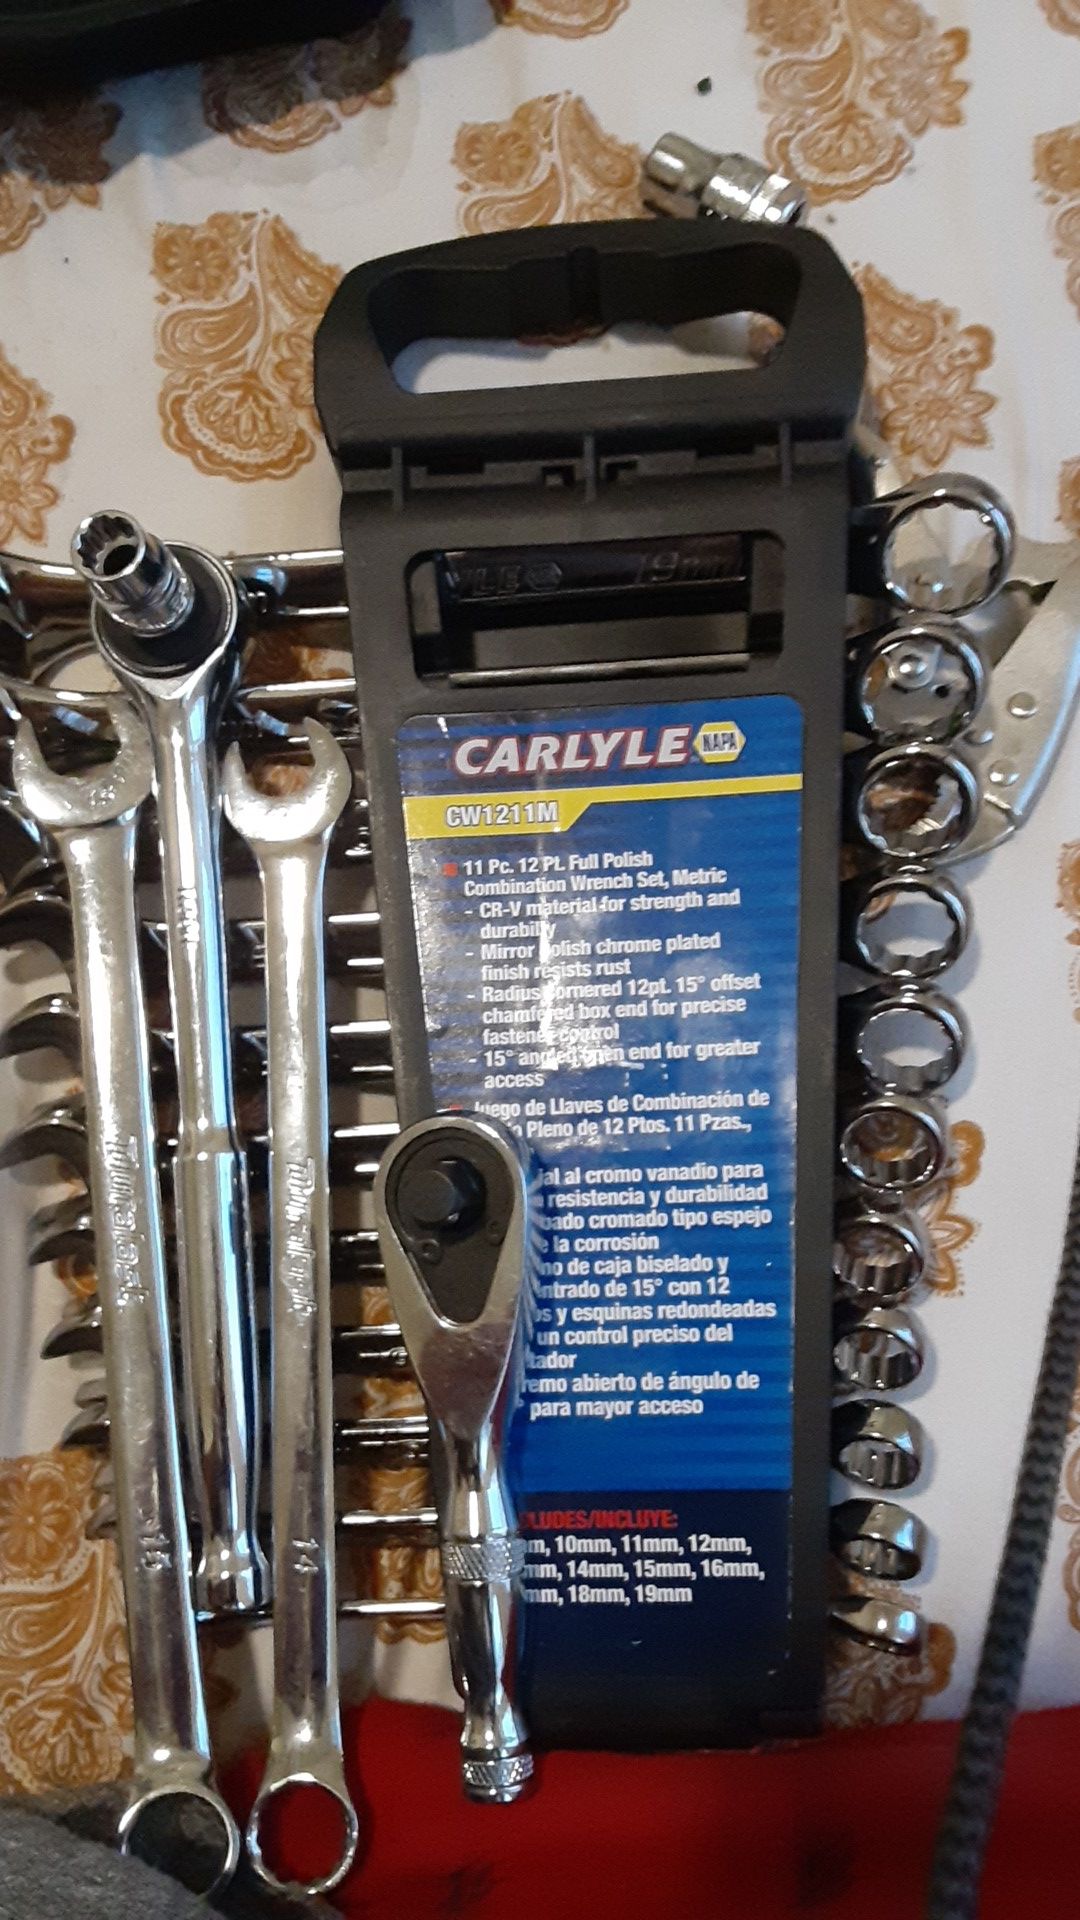 Carlyle metric wrench set